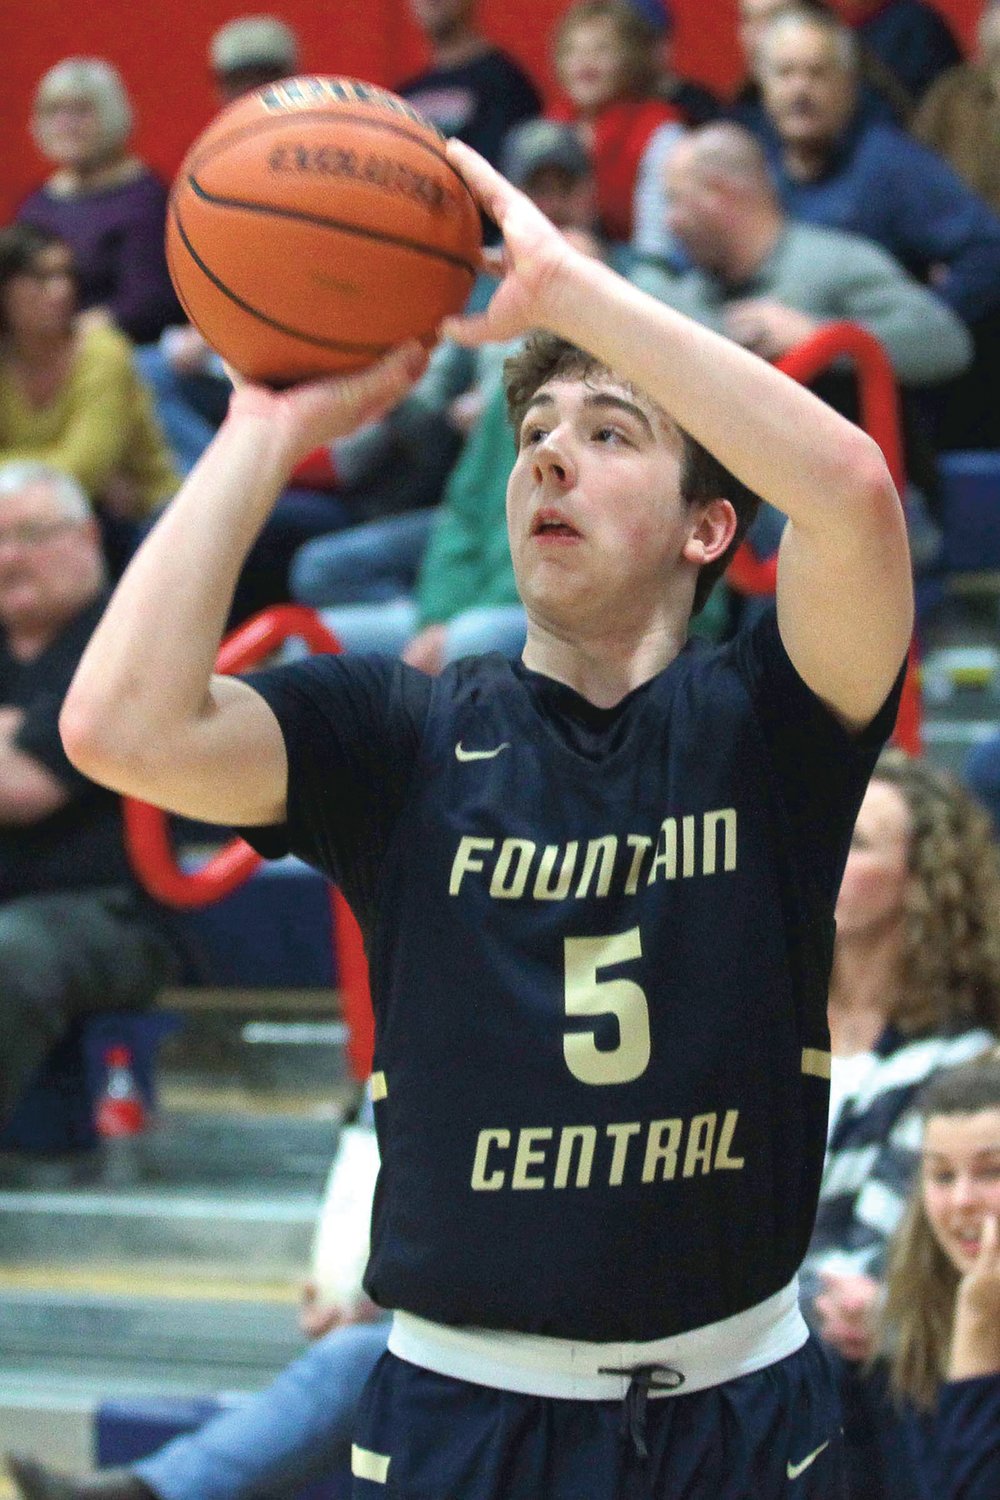 Andrew Shabi of Fountain Central hits a 3-Pointer in a game last season.